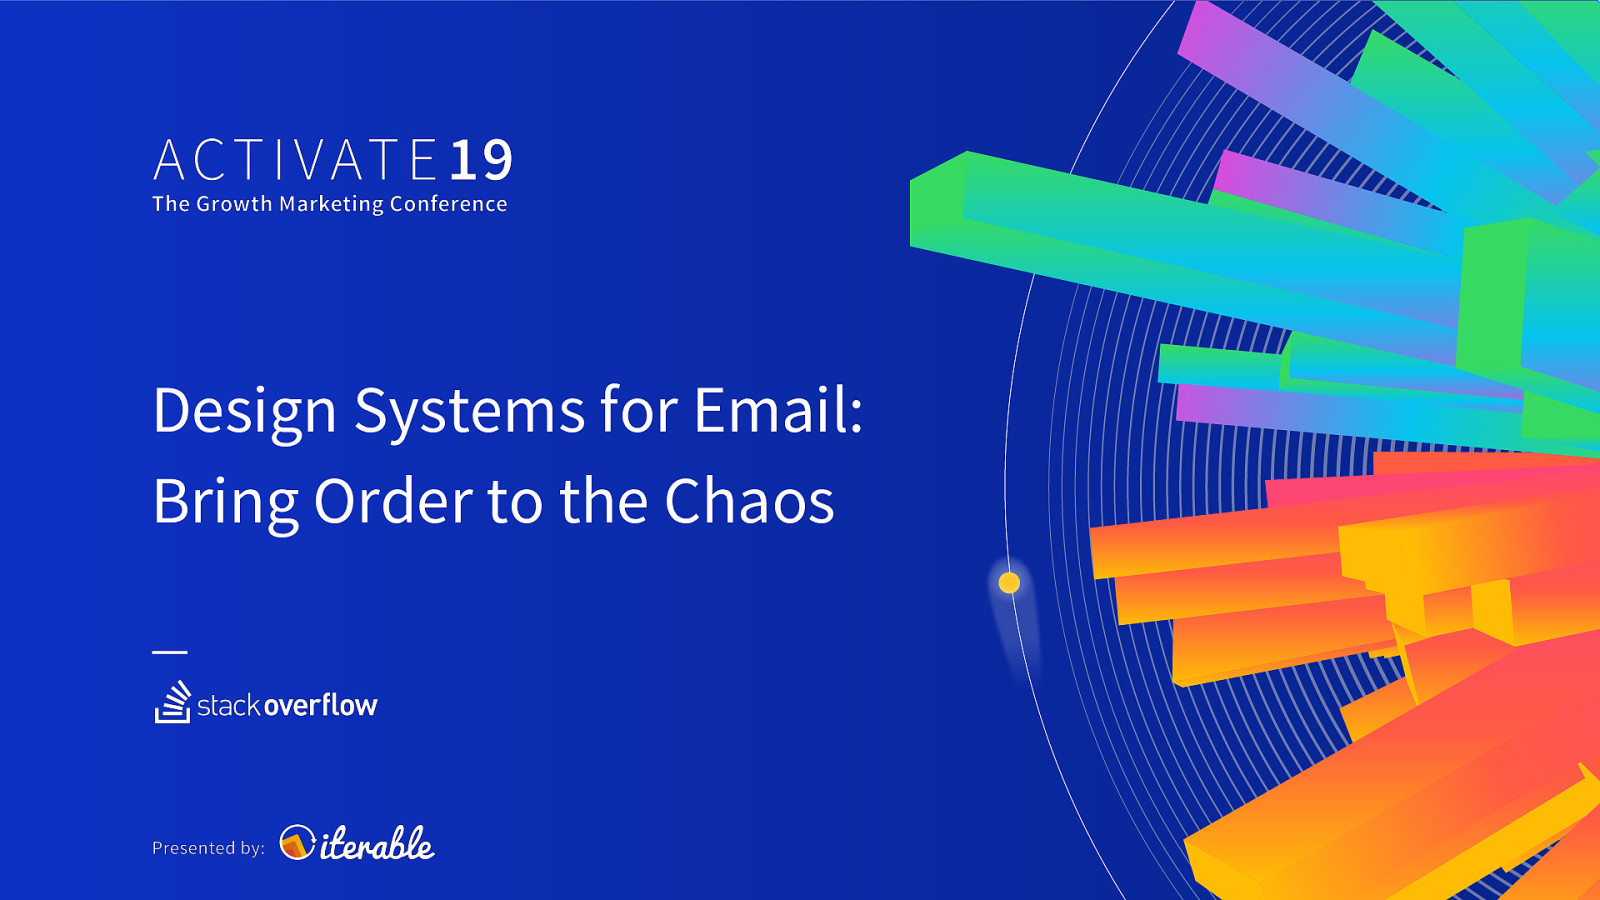 Design Systems for Email: Bring Order to the Chaos